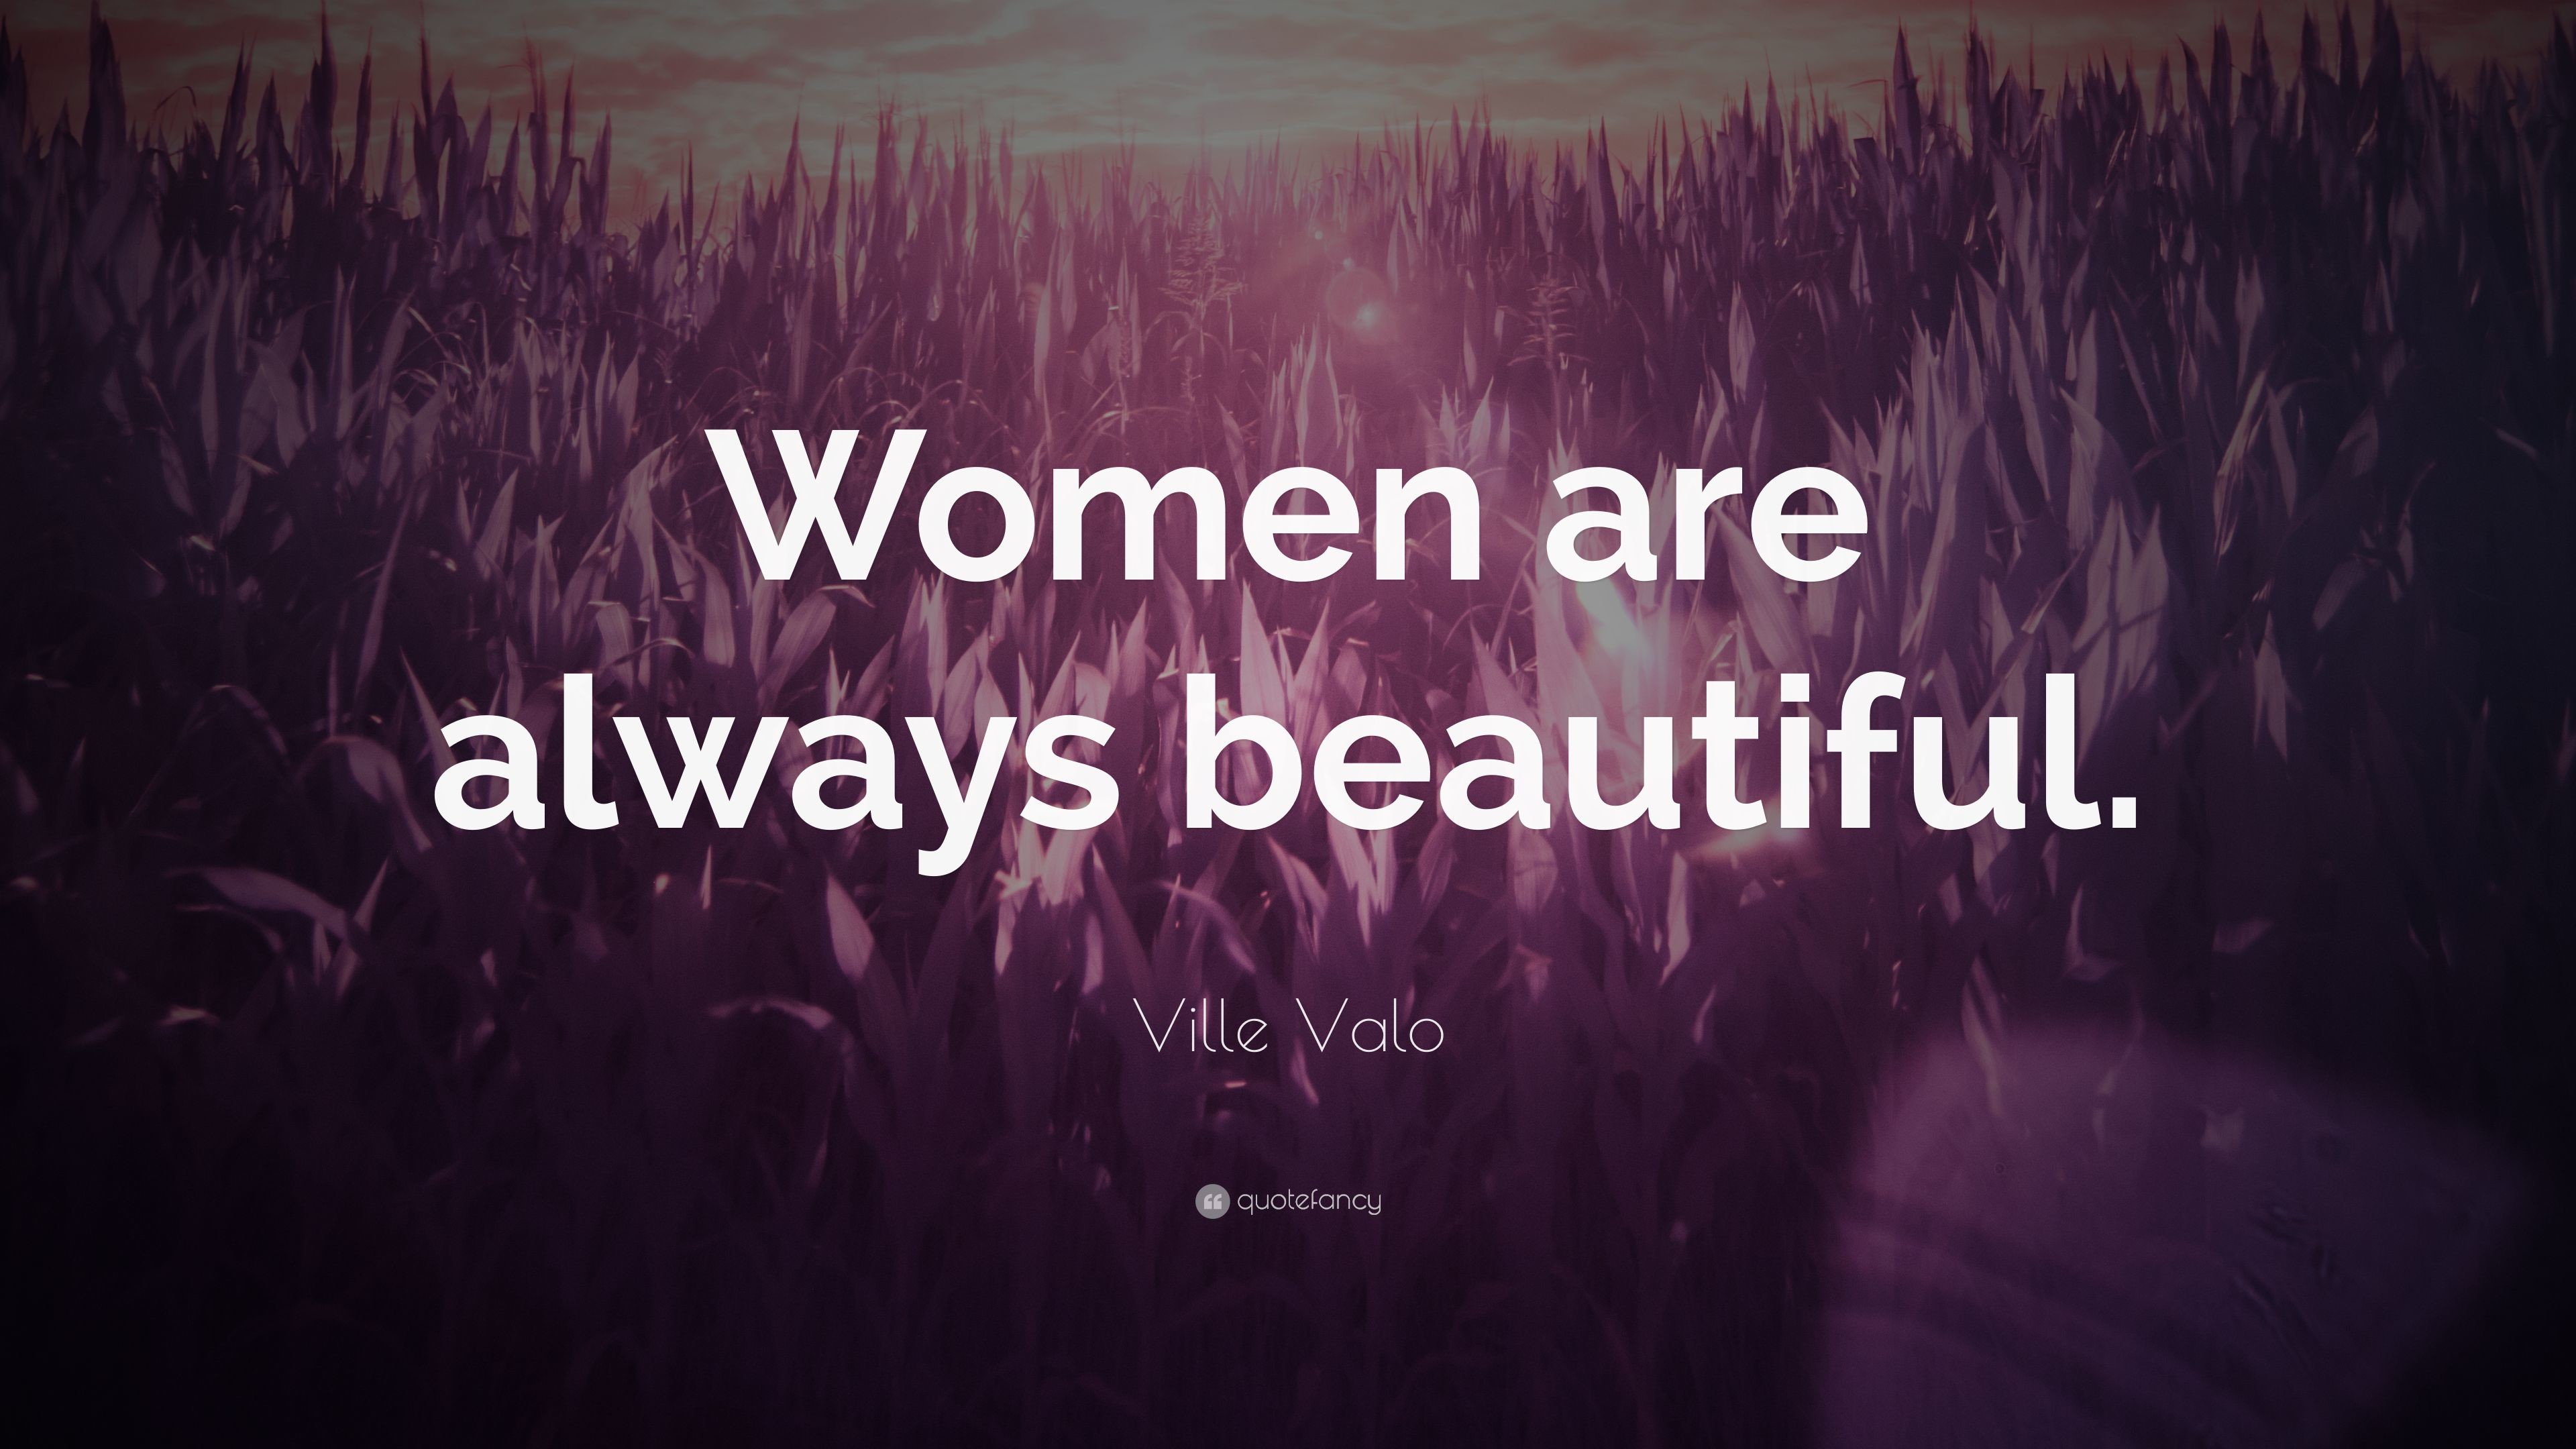 3840x2160 Ville Valo Quote: “Women are always beautiful.”